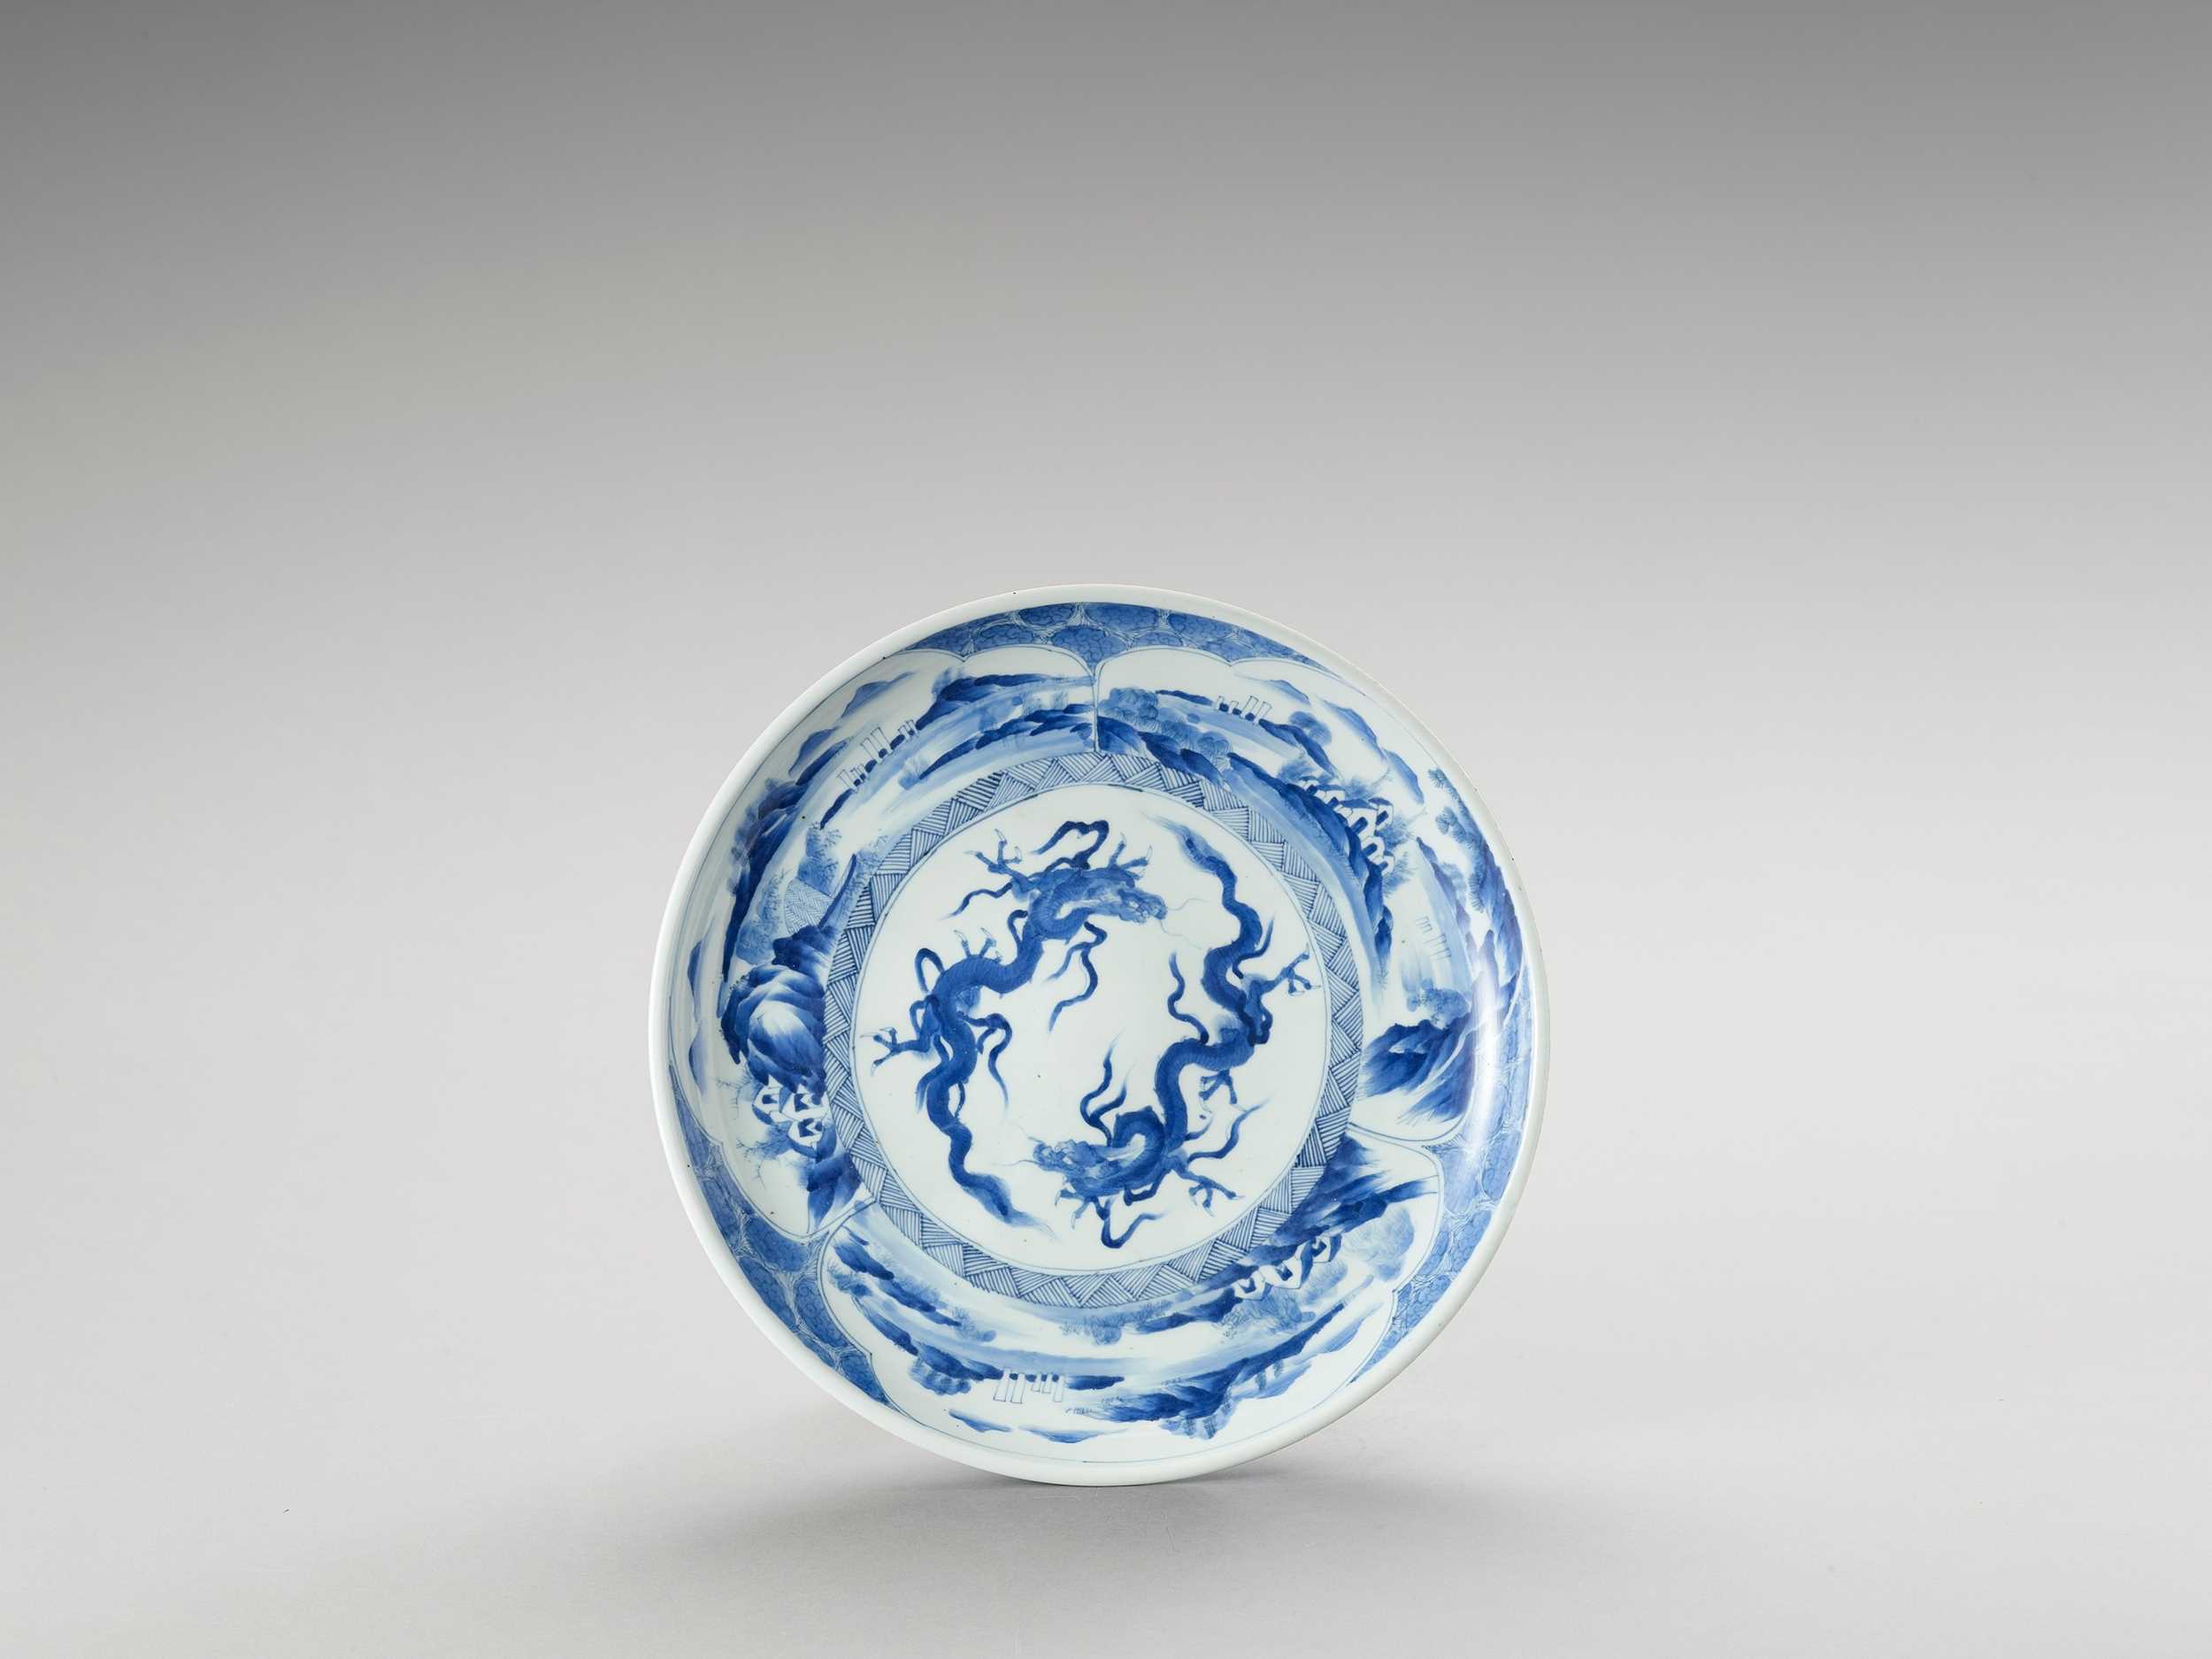 Lot 1016 - A BLUE AND WHITE PORCELAIN ‘DRAGON’ PLATE